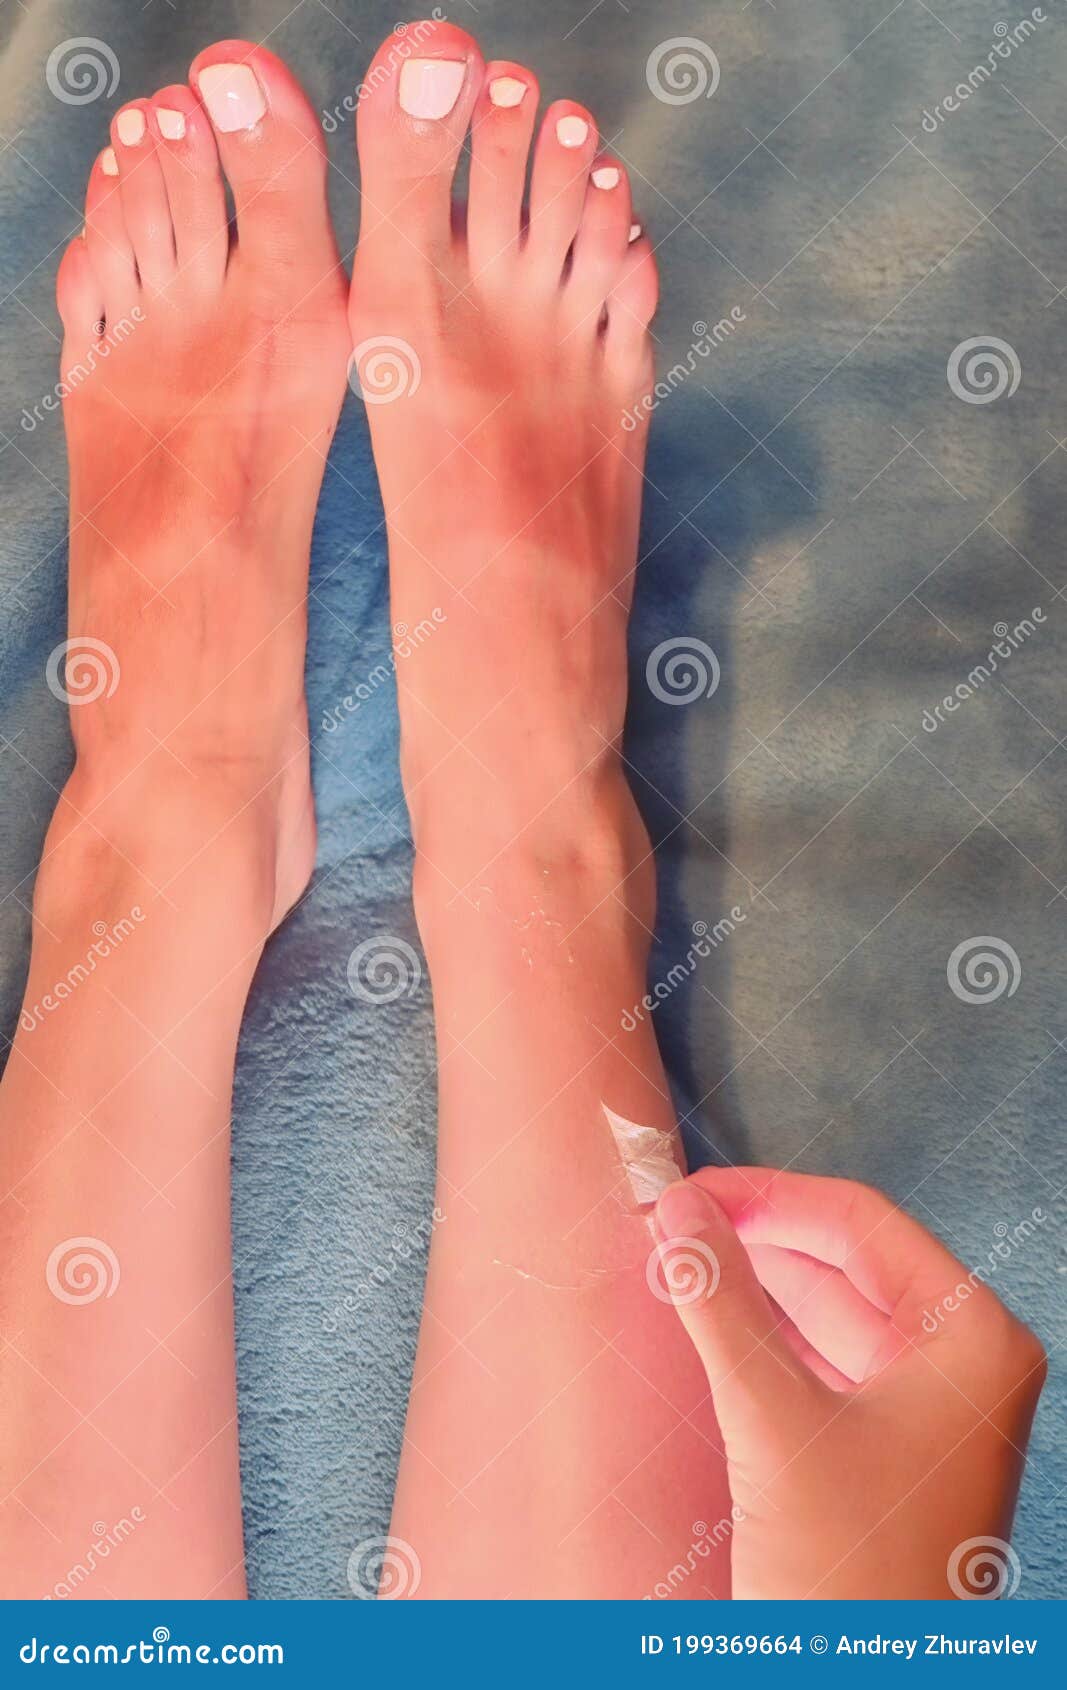 the girl peels off the skin off her legs after ultraviolet irradiation